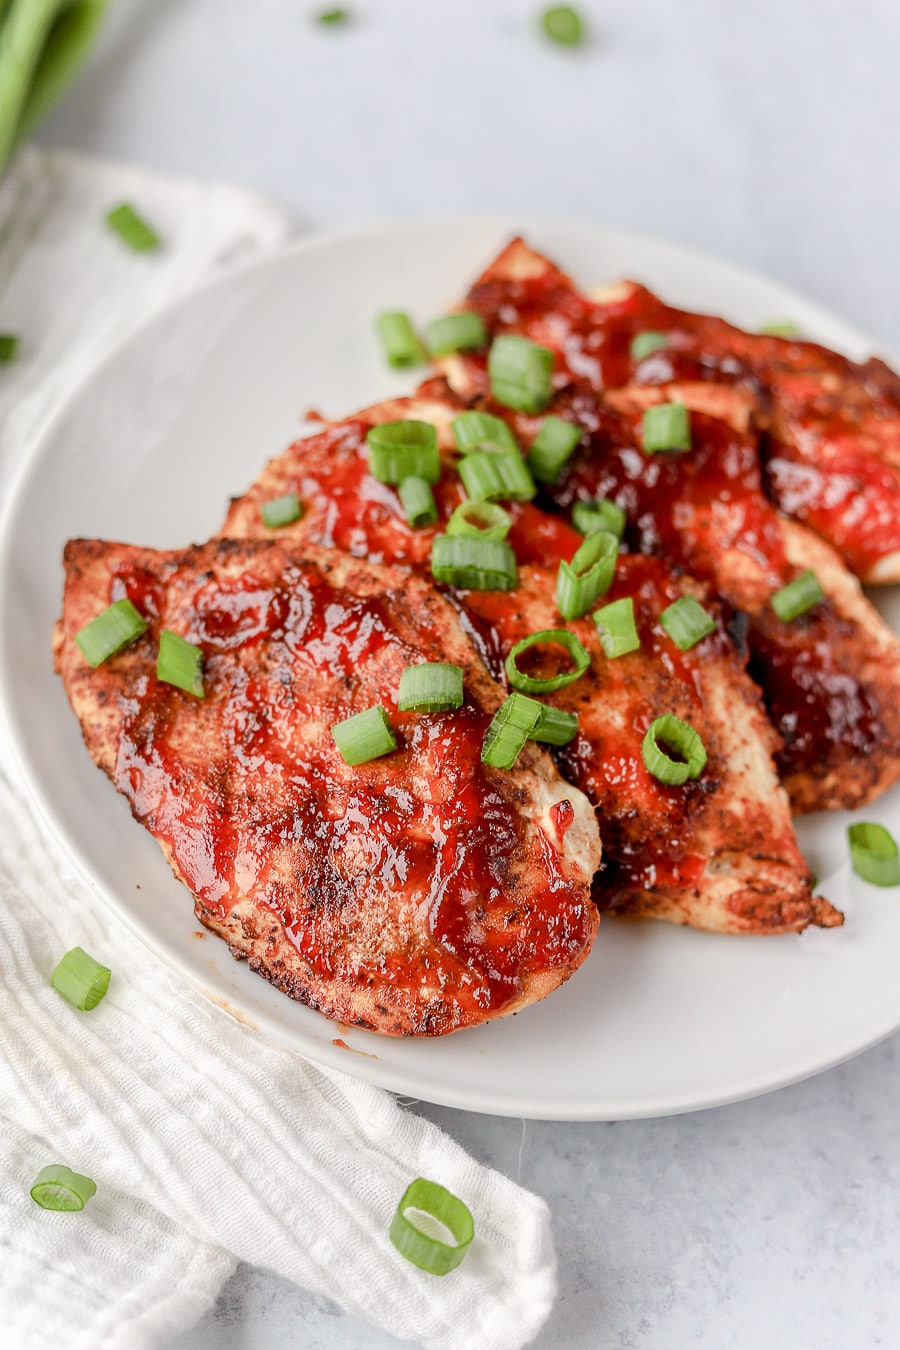 Air Fryer BBQ Chicken is such an easy way to prepare chicken for an easy weeknight dinner, or meal prepping recipe. You'll love this quick air fryer chicken recipe!